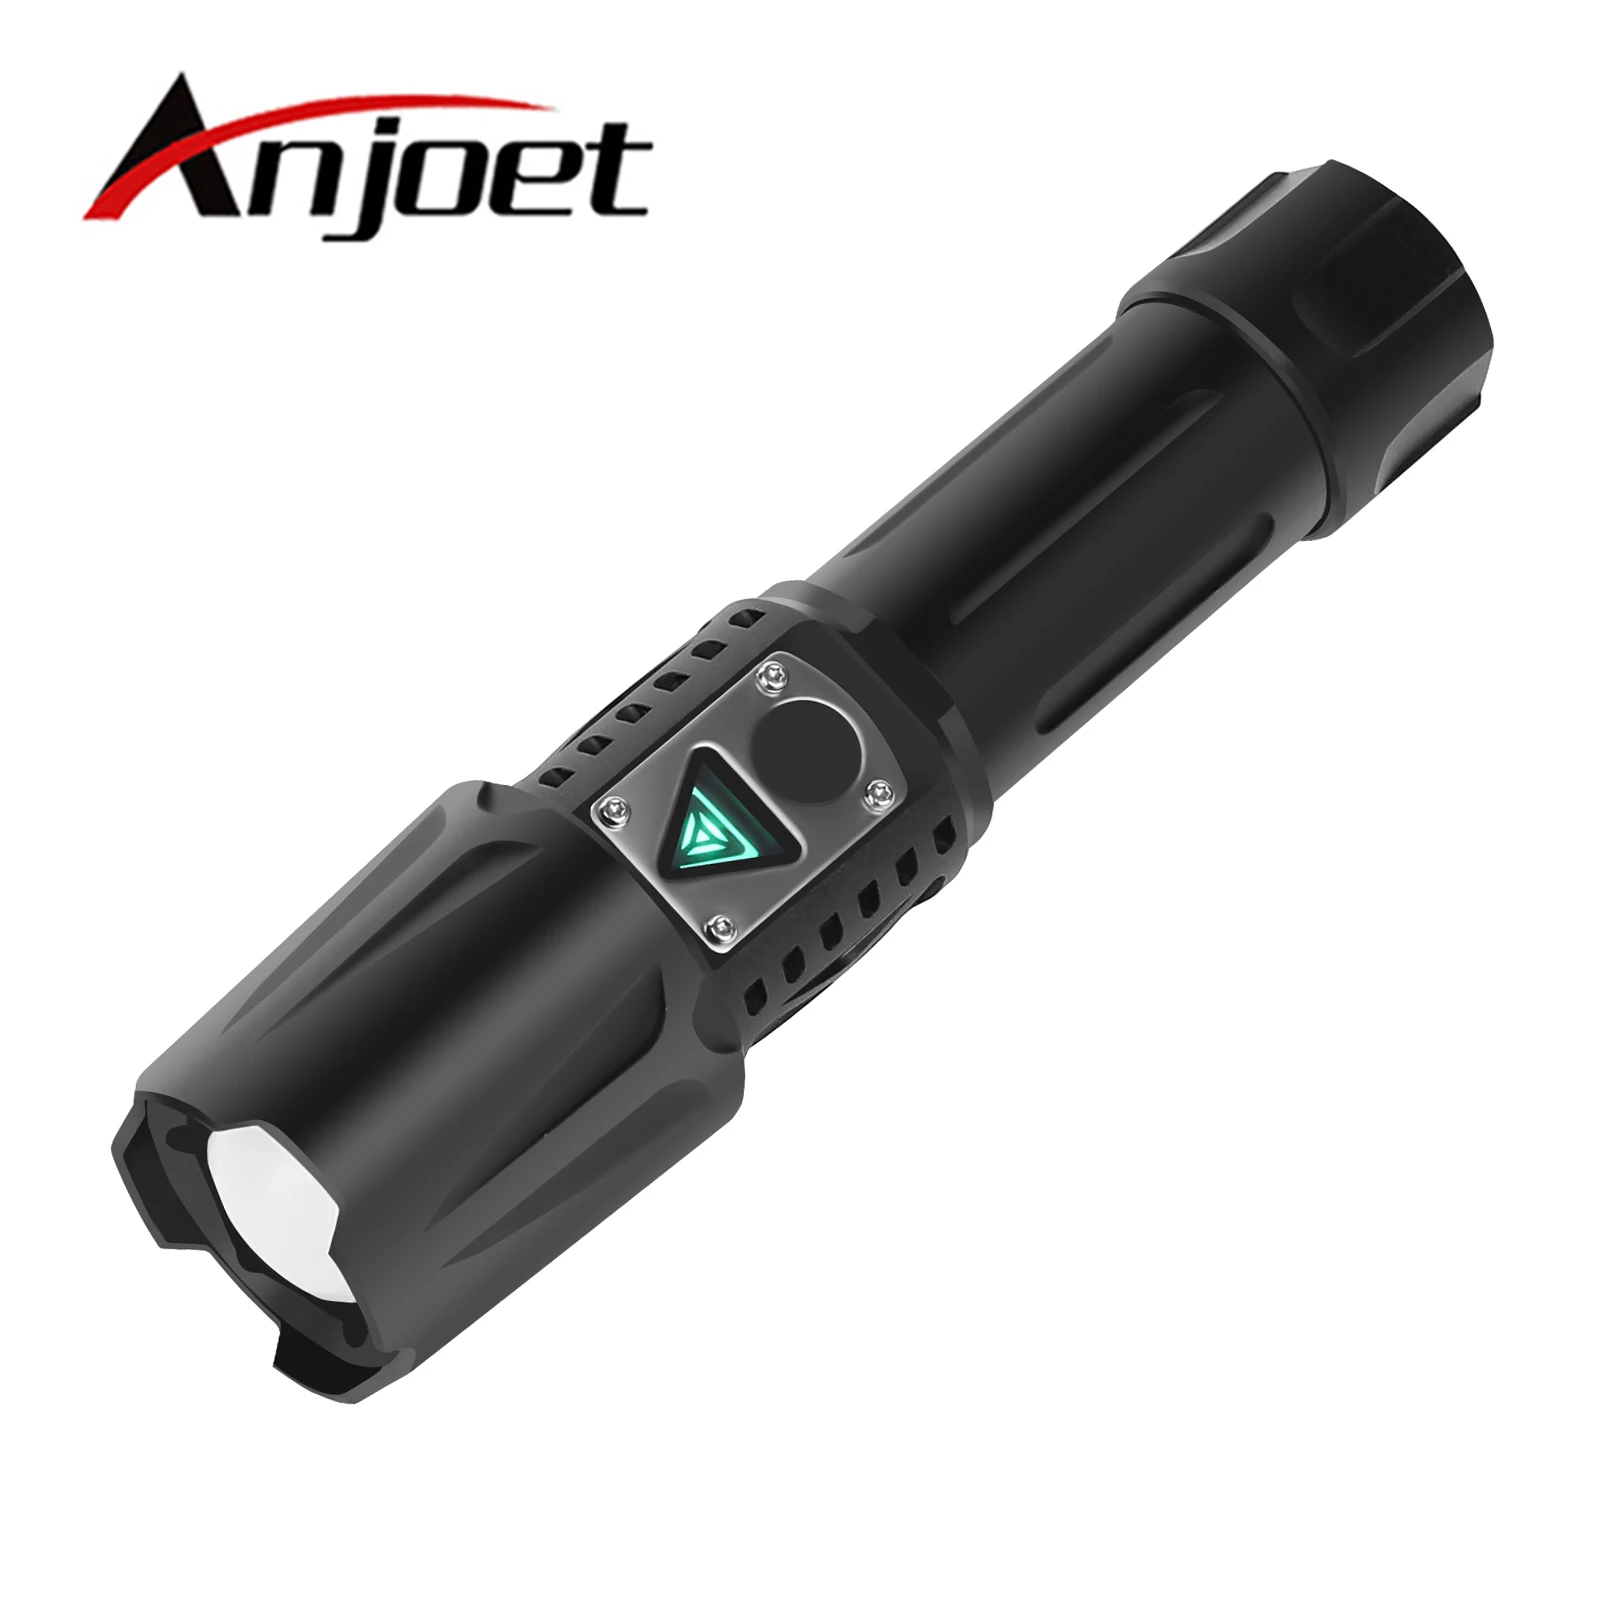 

High Power XHP360 LED Flashlight Rechargeable Telescopic Focusing Torch Zoom Hand Lantern For Camping, Outdoor & Emergency USE